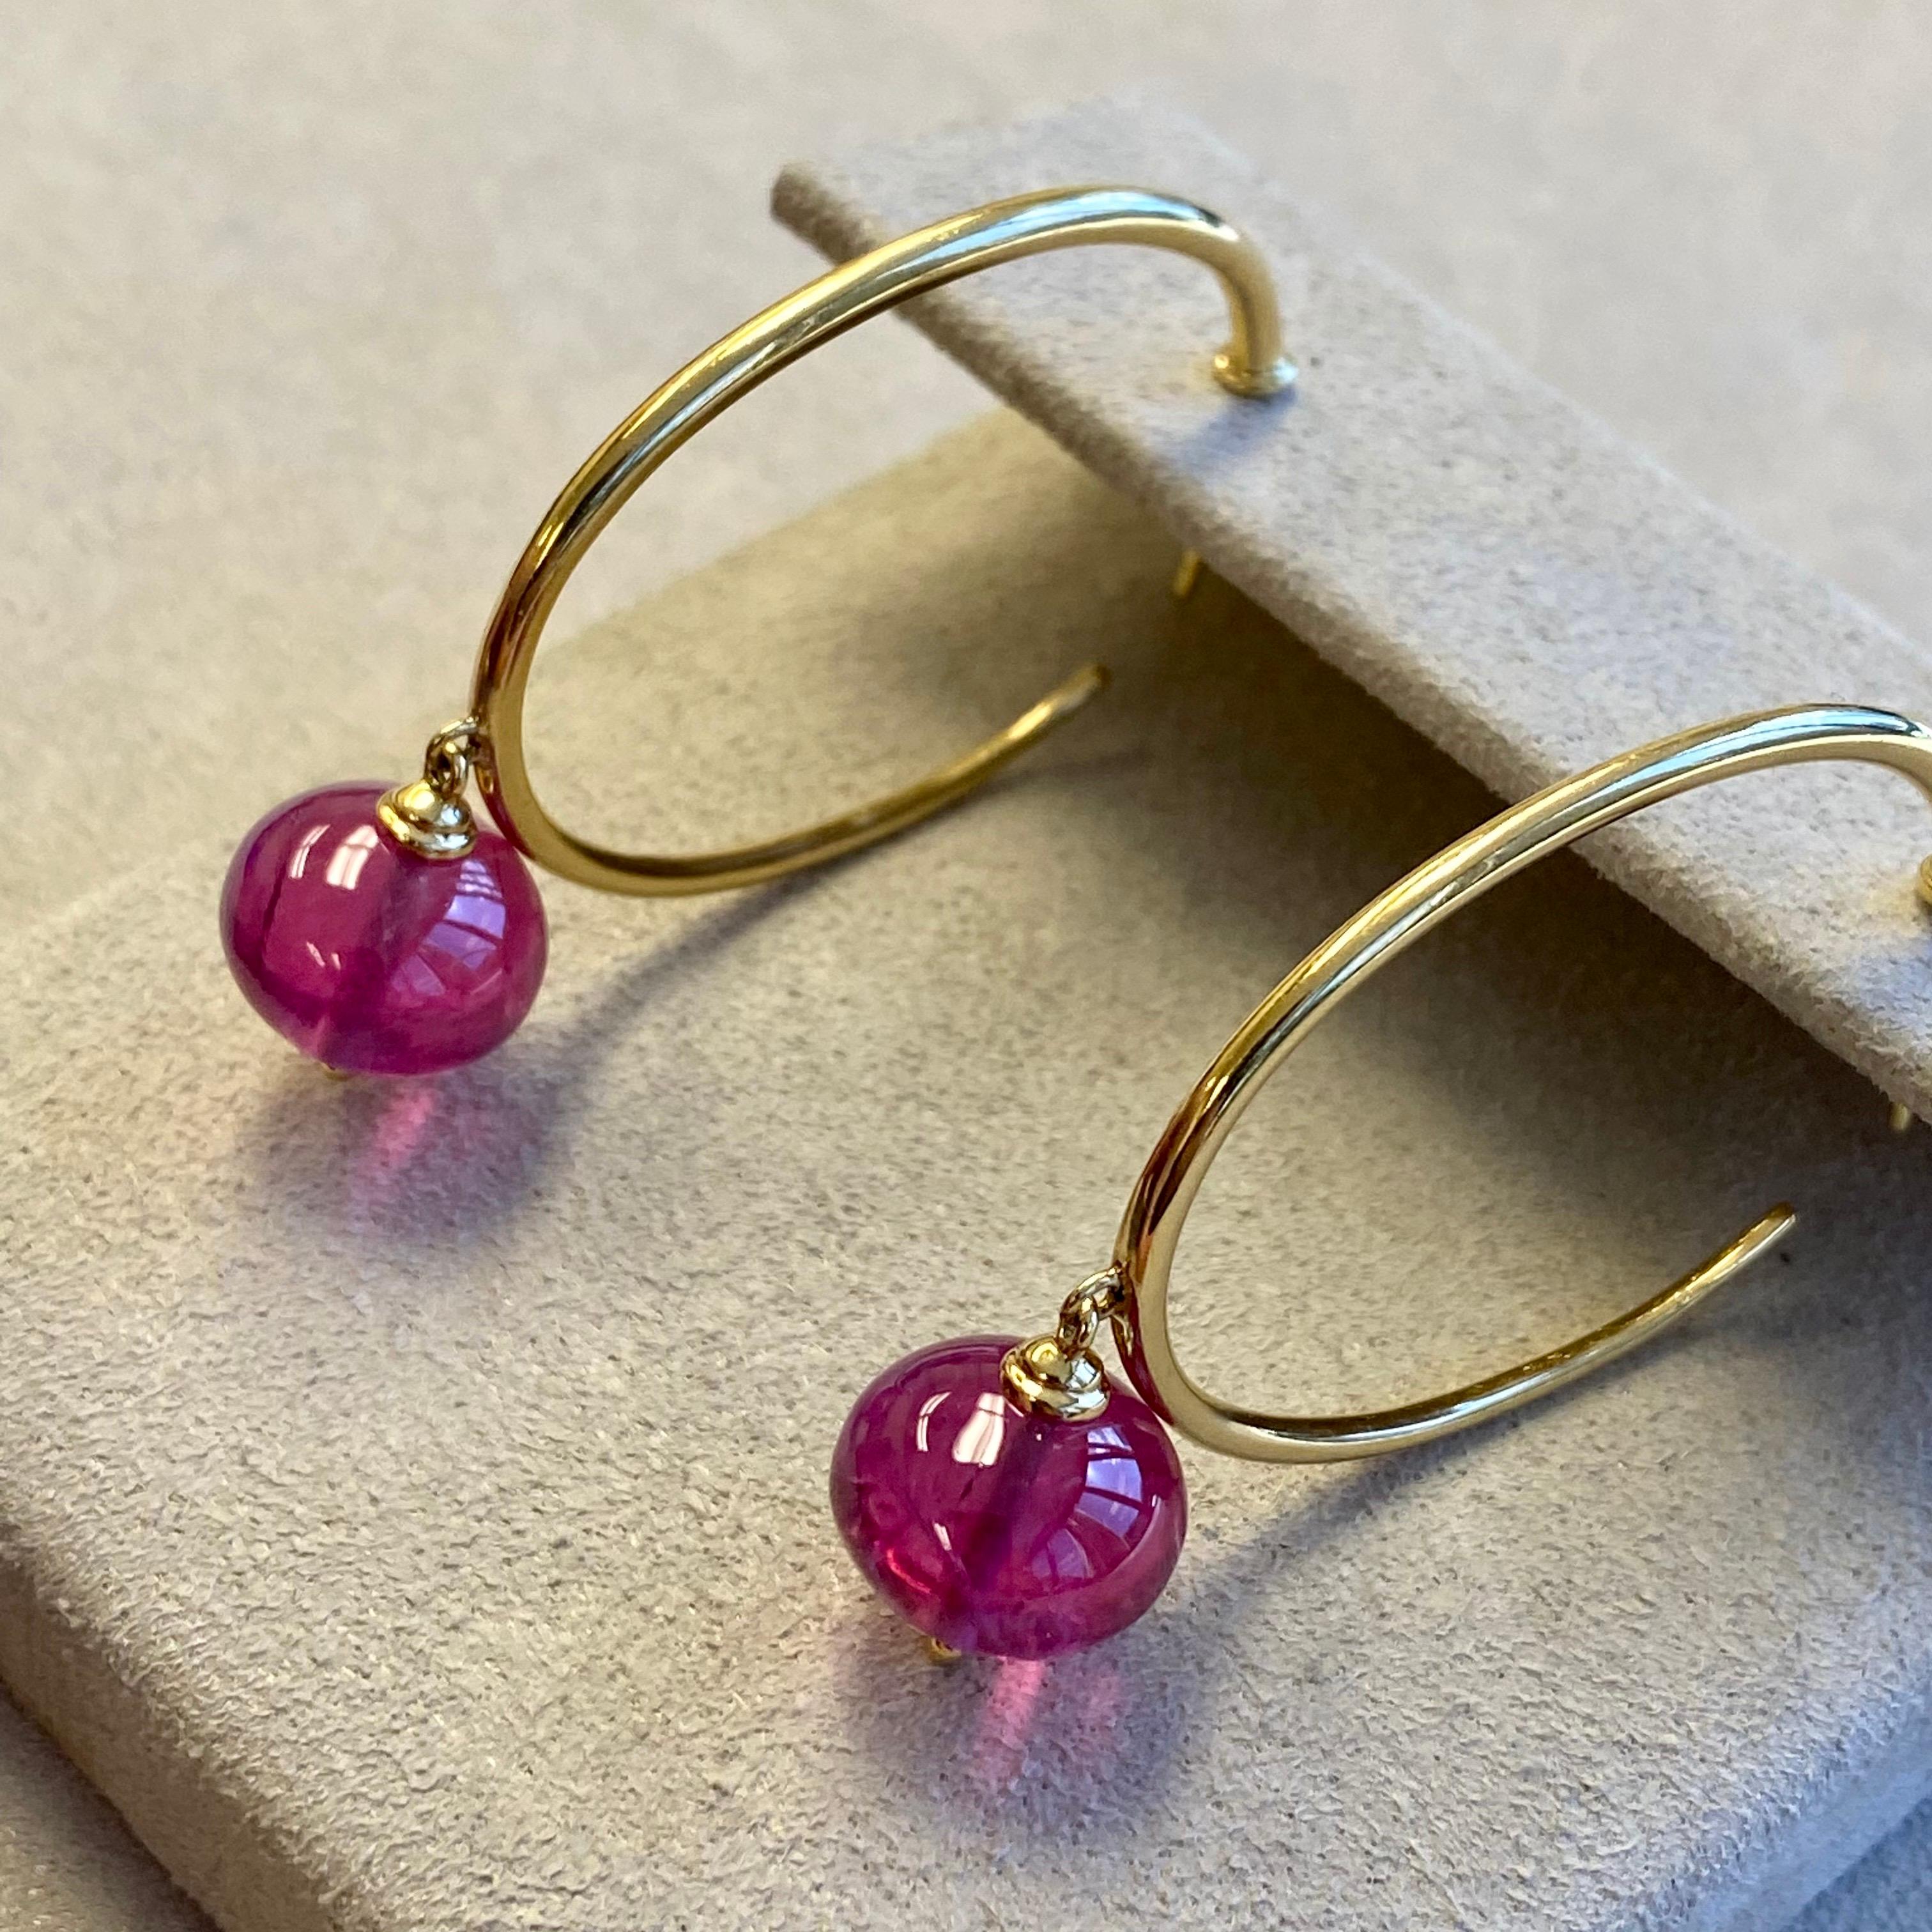 Created in 18 karat yellow gold
Rubellite 22 carats approx.
18 karat yellow gold butterfly backs

Crafted in 18-karat yellow gold, these earrings showcase a striking Rubellite gemstone of around 22 carats and secure with butterfly backs in the same